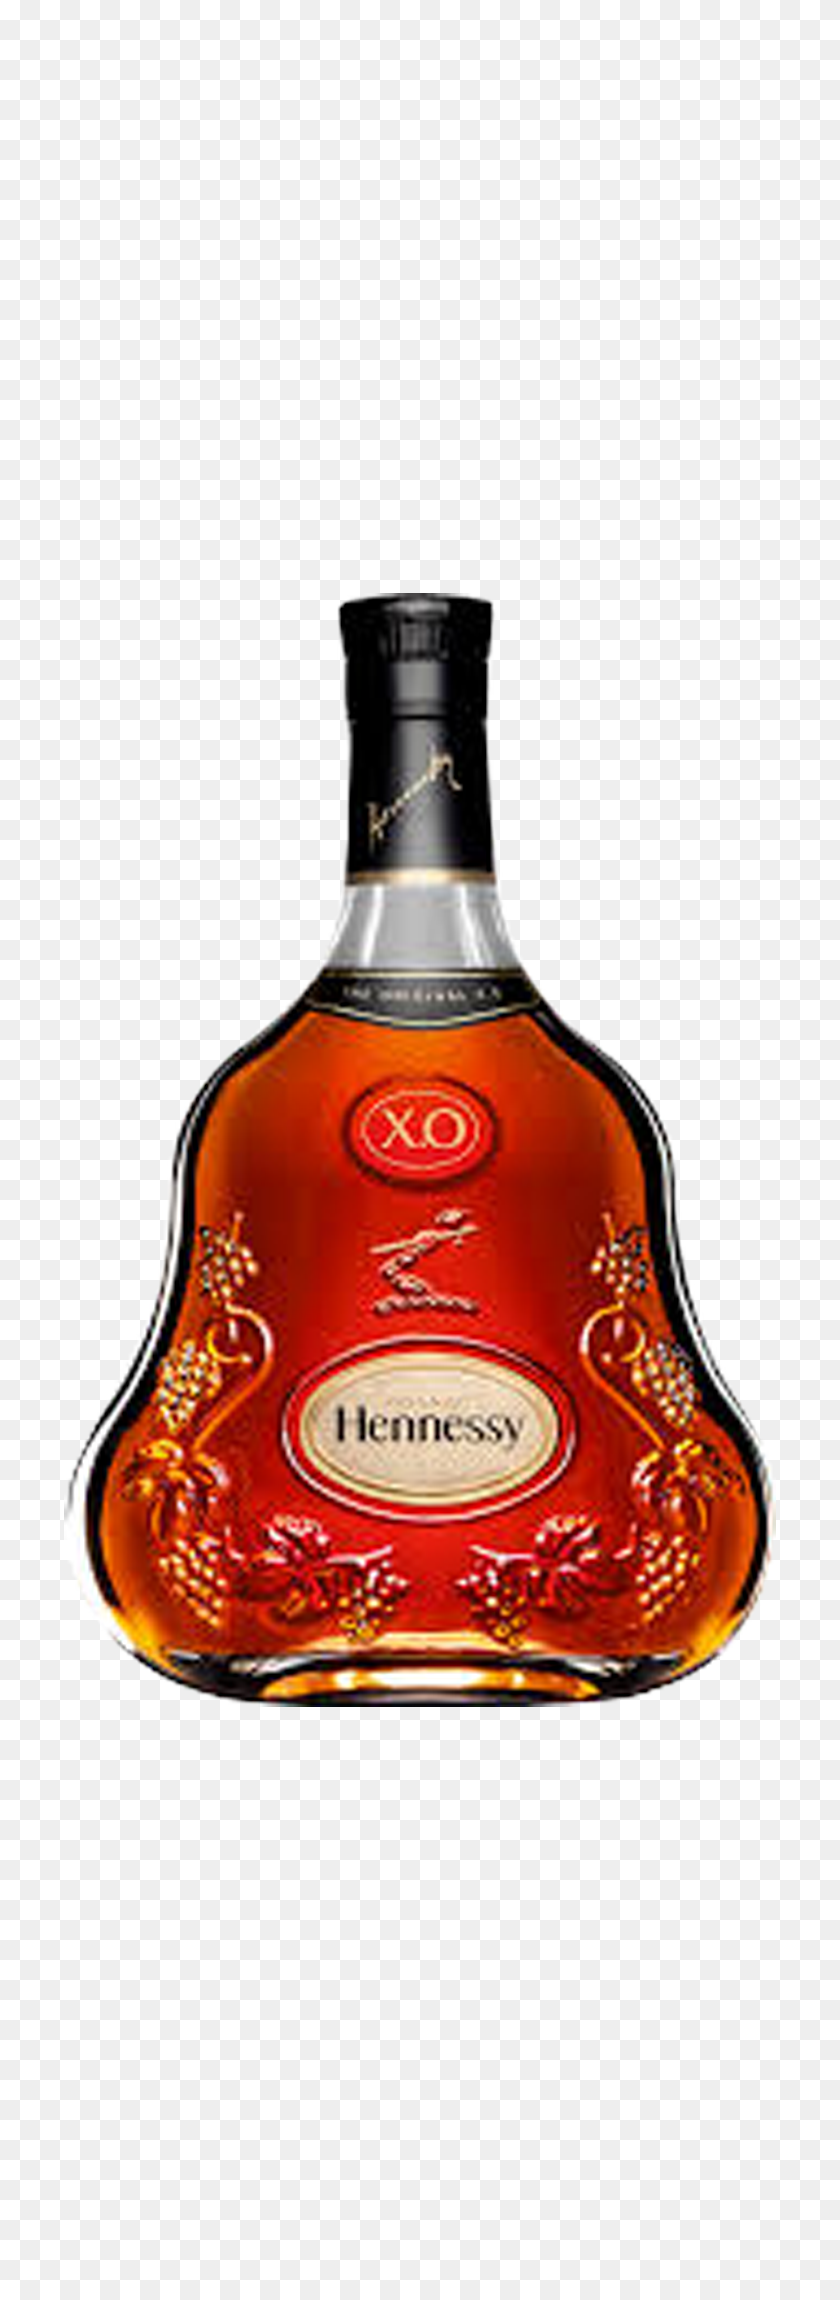 752x2240 Coñac Hennessy Xo - Botella Hennessy Png